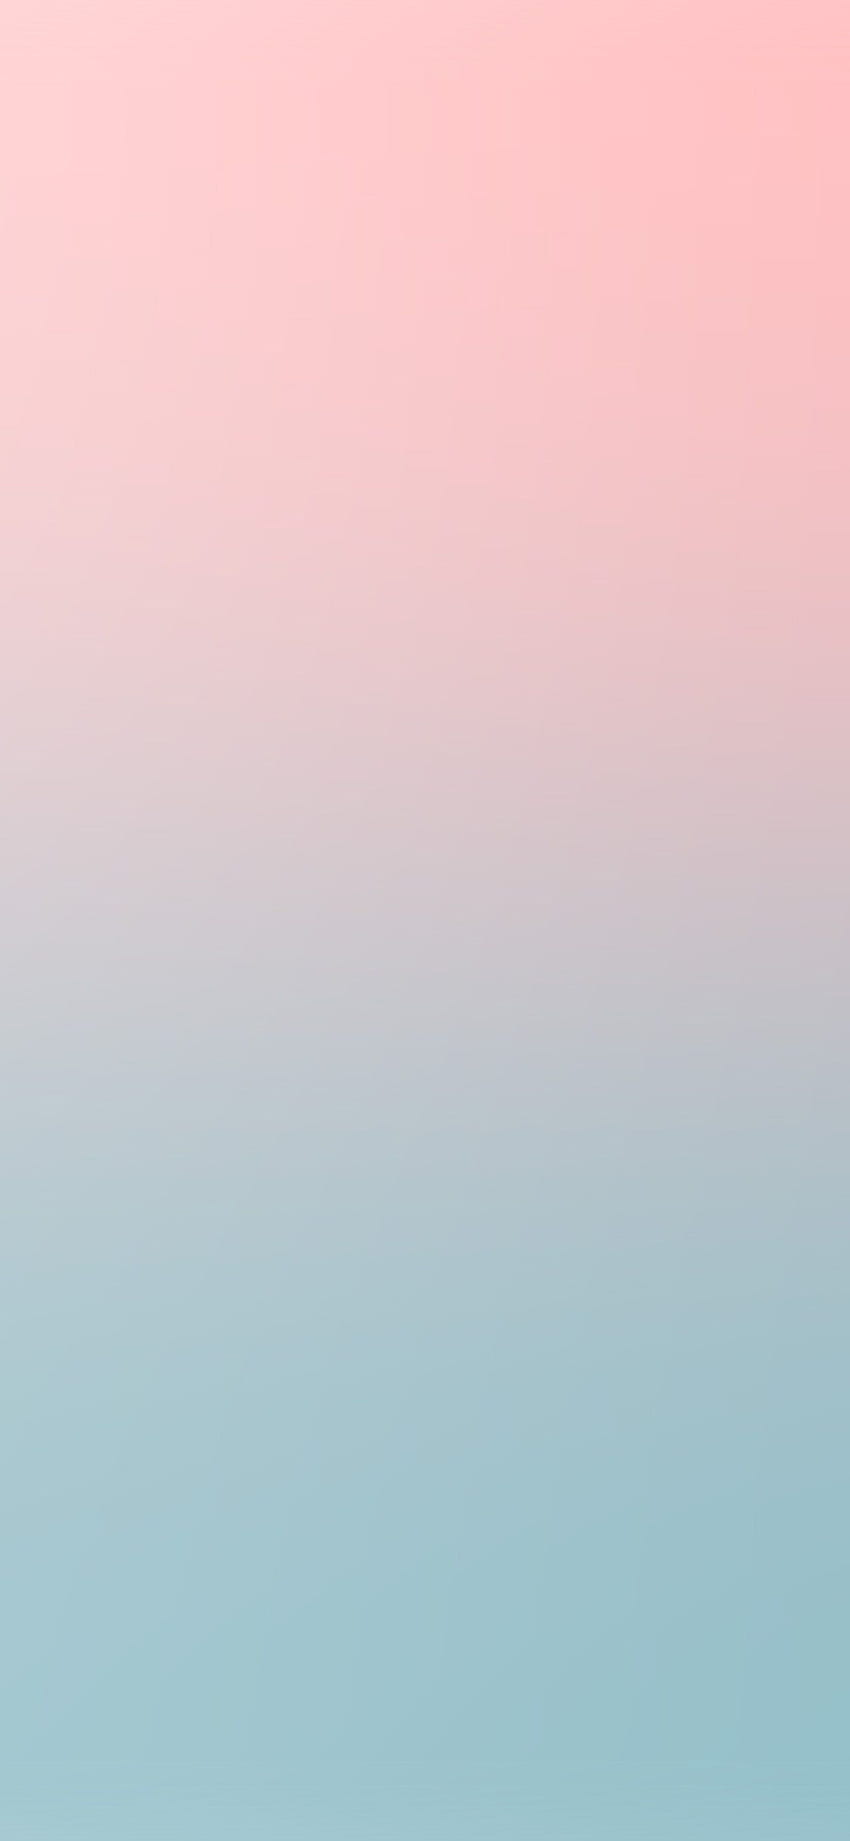 Apple IPhone Sm07 Pink Blue Soft Pastel Blur Gradation. Ombre Iphone, Color Iphone, Ombre HD phone wallpaper